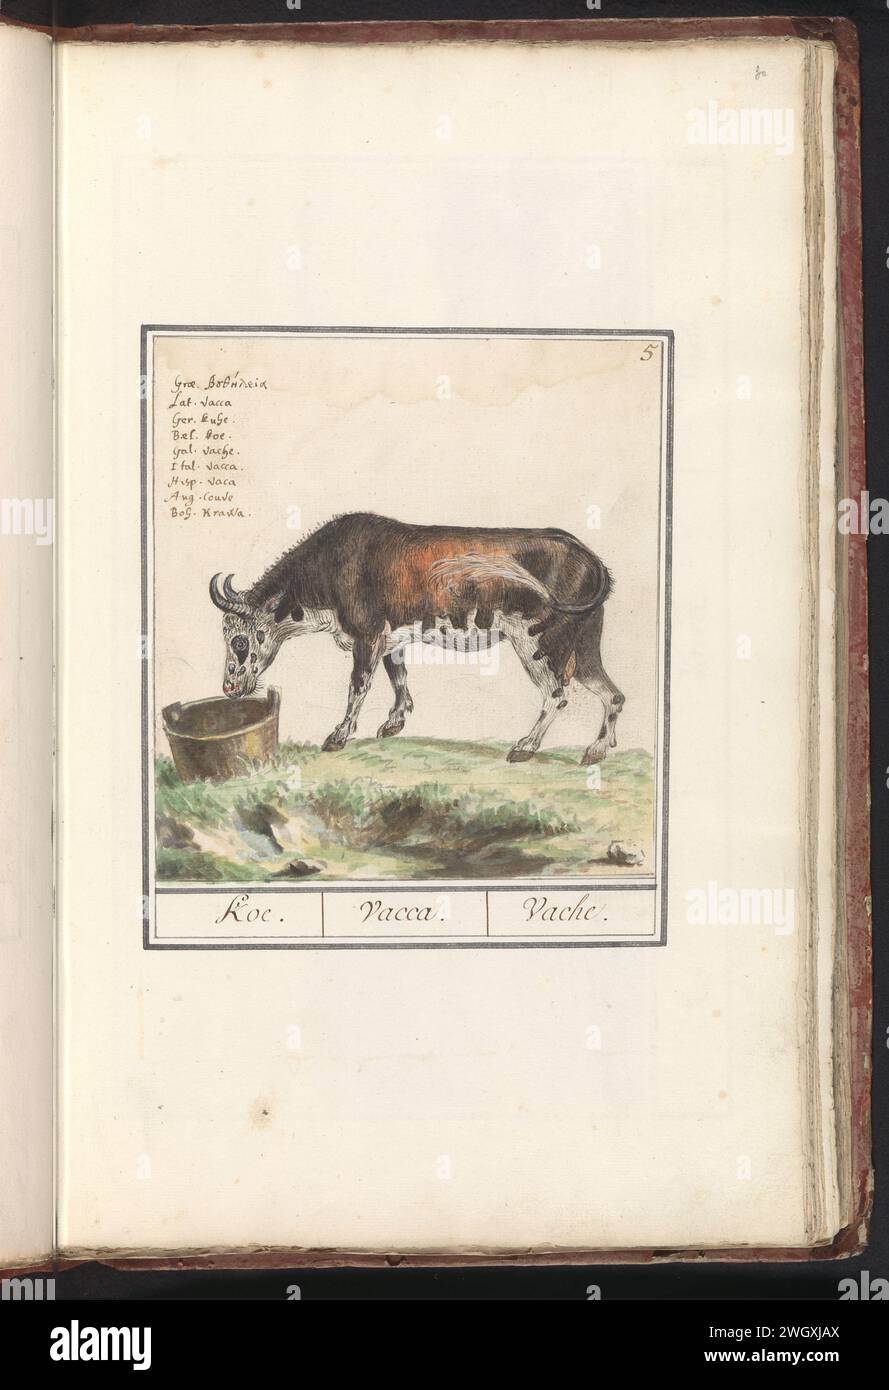 Cow (Bos Taurus), anselmus Boëtius de Boodt, 1596 - 1610 drawing Cow. Numbered at the top right: 5. At the top left the name in nine languages. Part of the first album with drawings of four -legged friends. First of twelve albums with drawings of animals, birds and plants known around 1600, commissioned by Emperor Rudolf II. With explanation in Dutch, Latin and French. draughtsman: Praagdraughtsman: Delft paper. ink. watercolor (paint). deck paint. pencil brush / pen cow Stock Photo